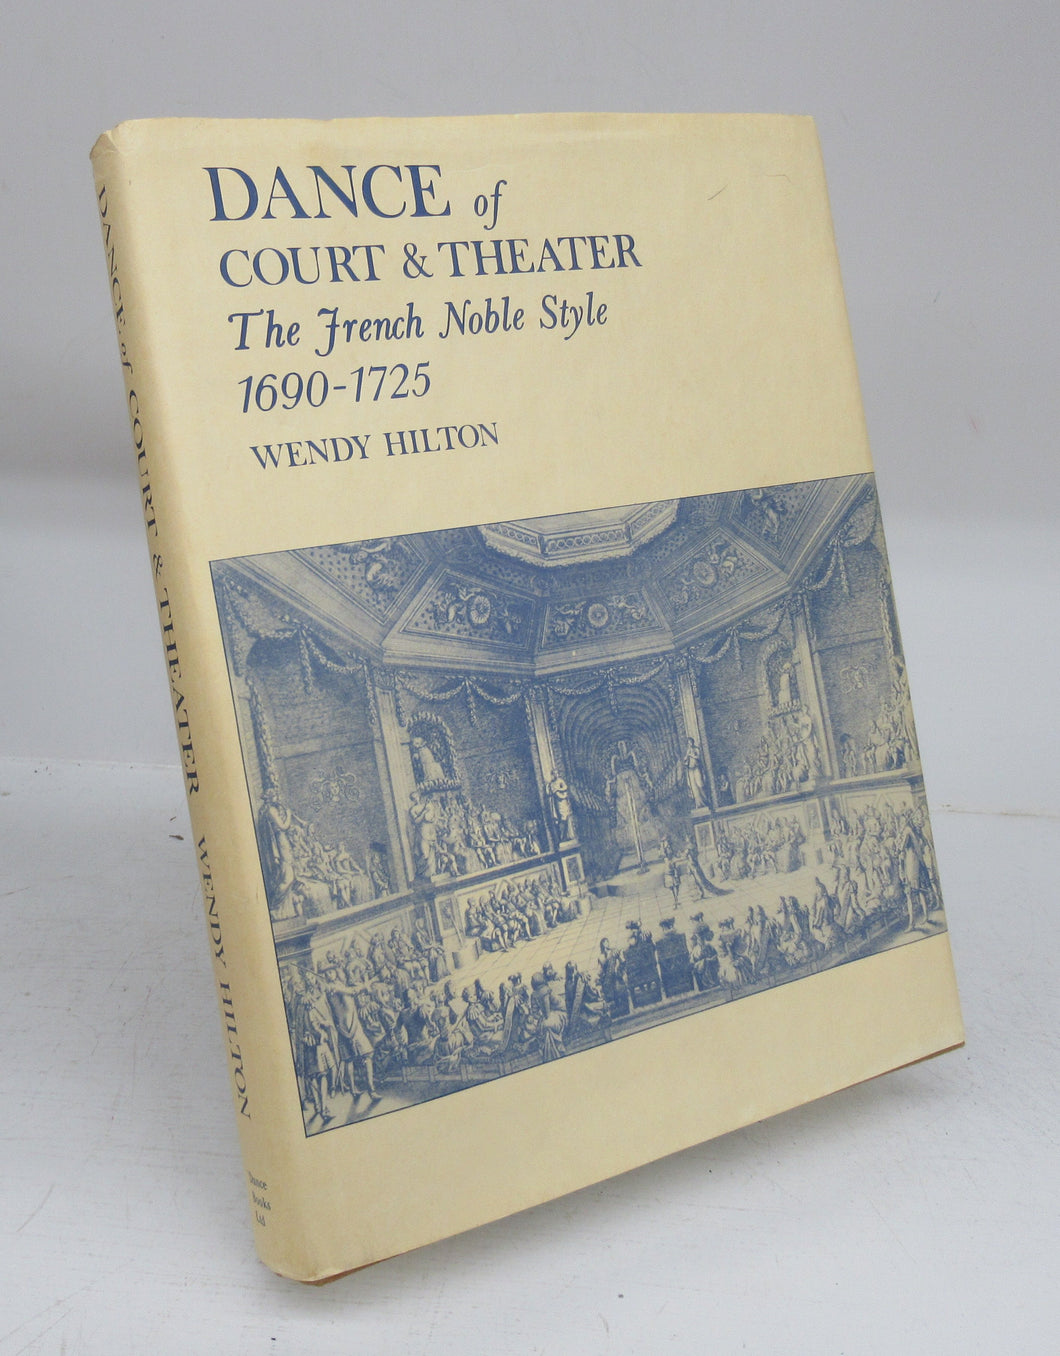 Dance of Court & Theater: The French Noble Style 1690-1725